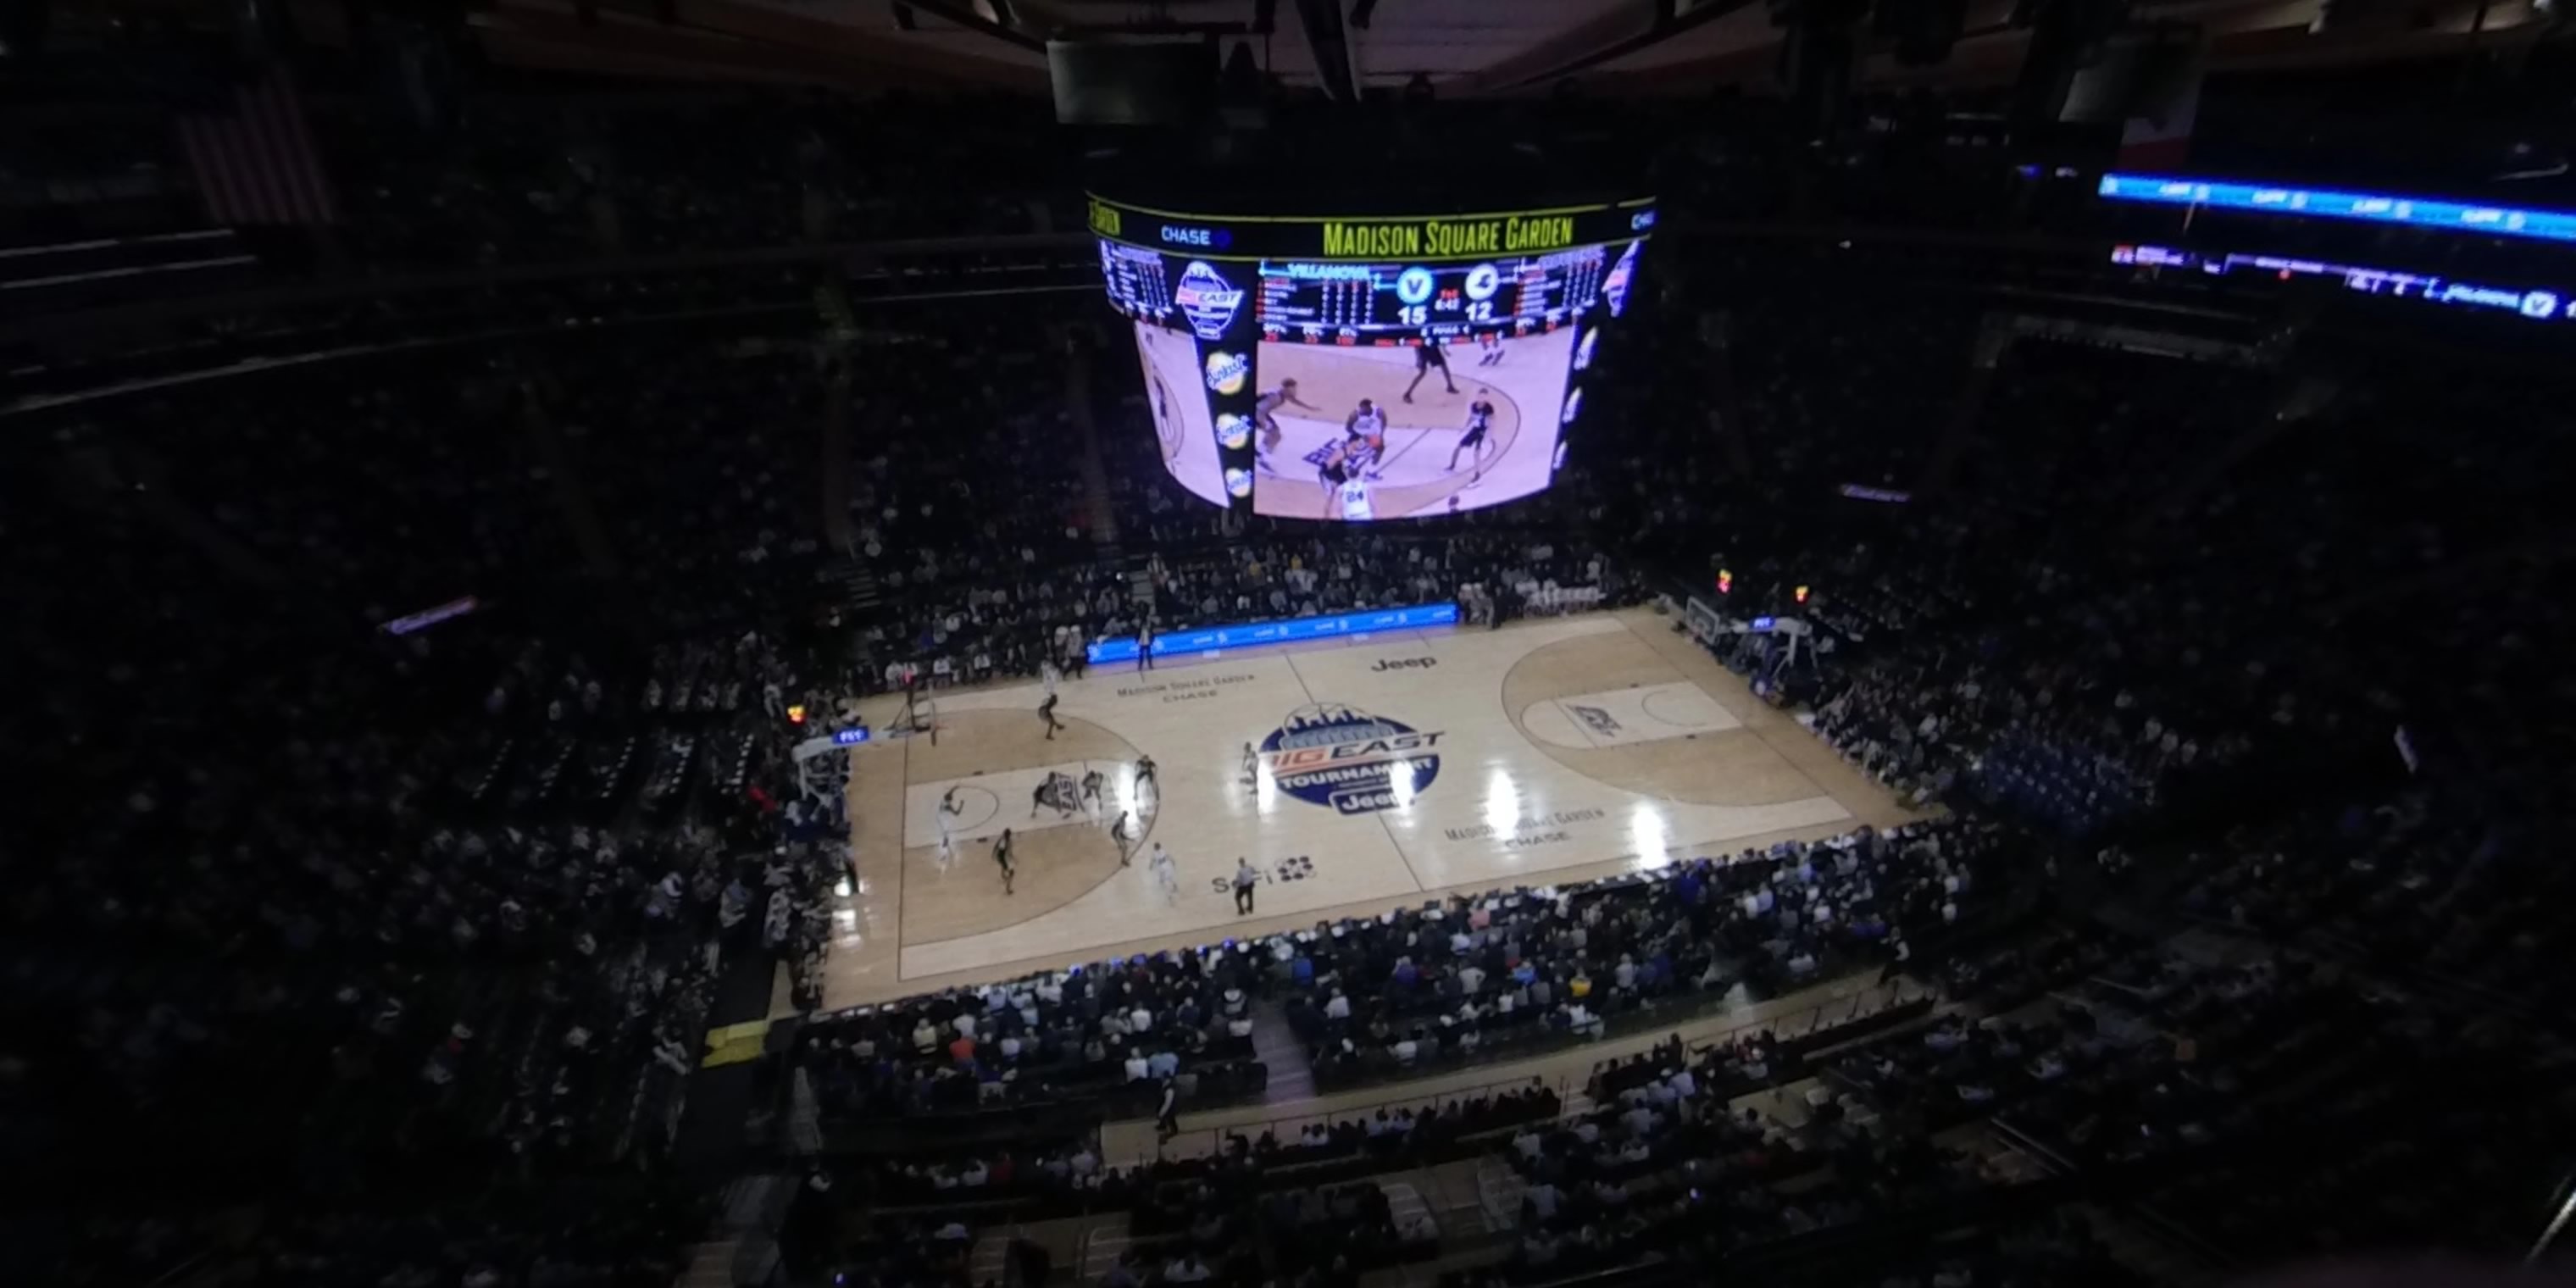 section 325 panoramic seat view  for basketball - madison square garden